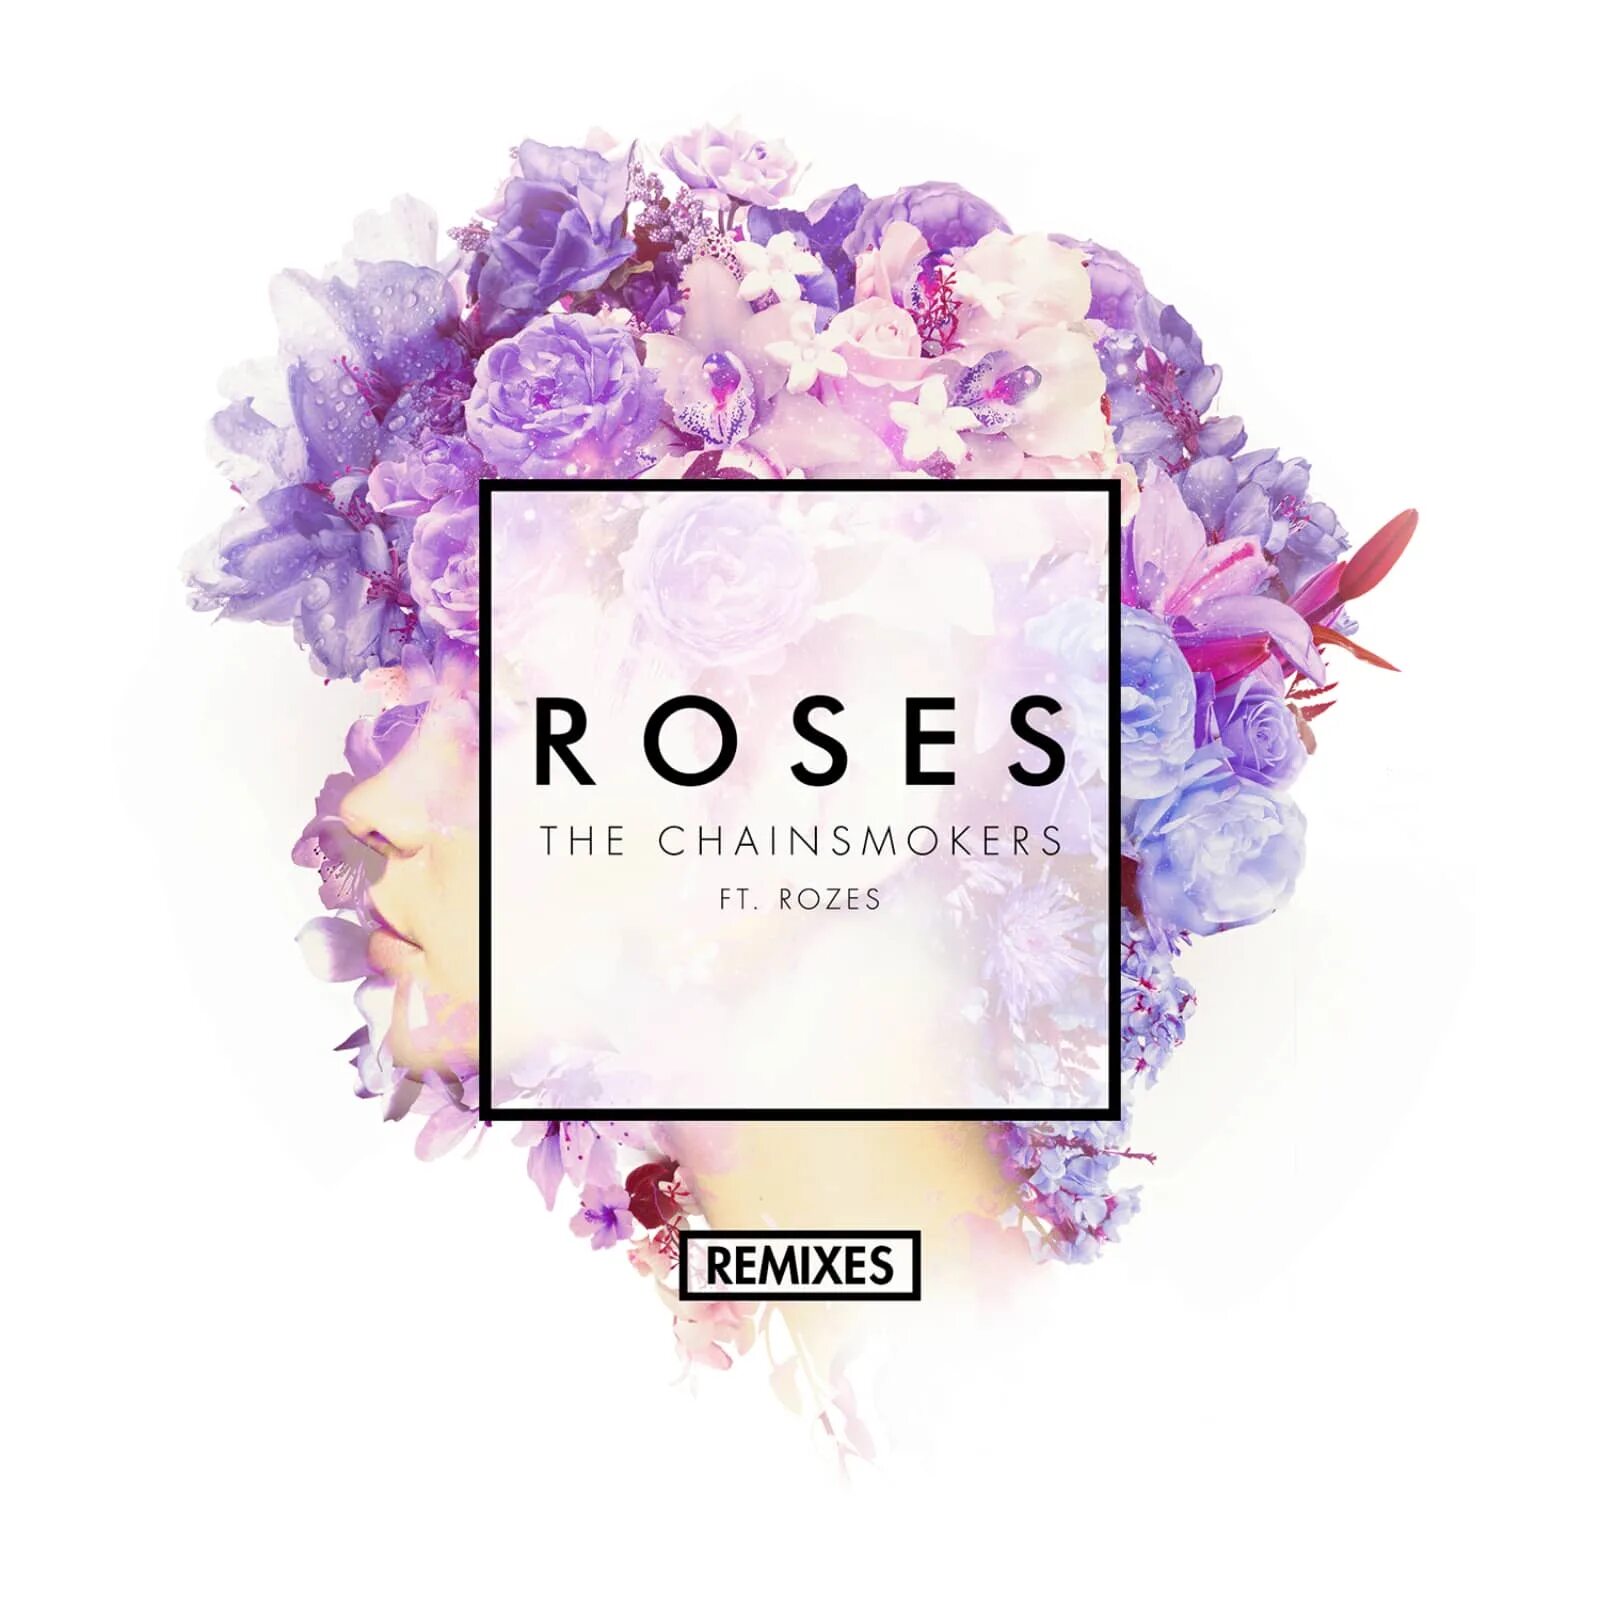 The Chainsmokers Roses. Обложка Chainsmokers Remix. The Chainsmokers logo. Roses Remix.